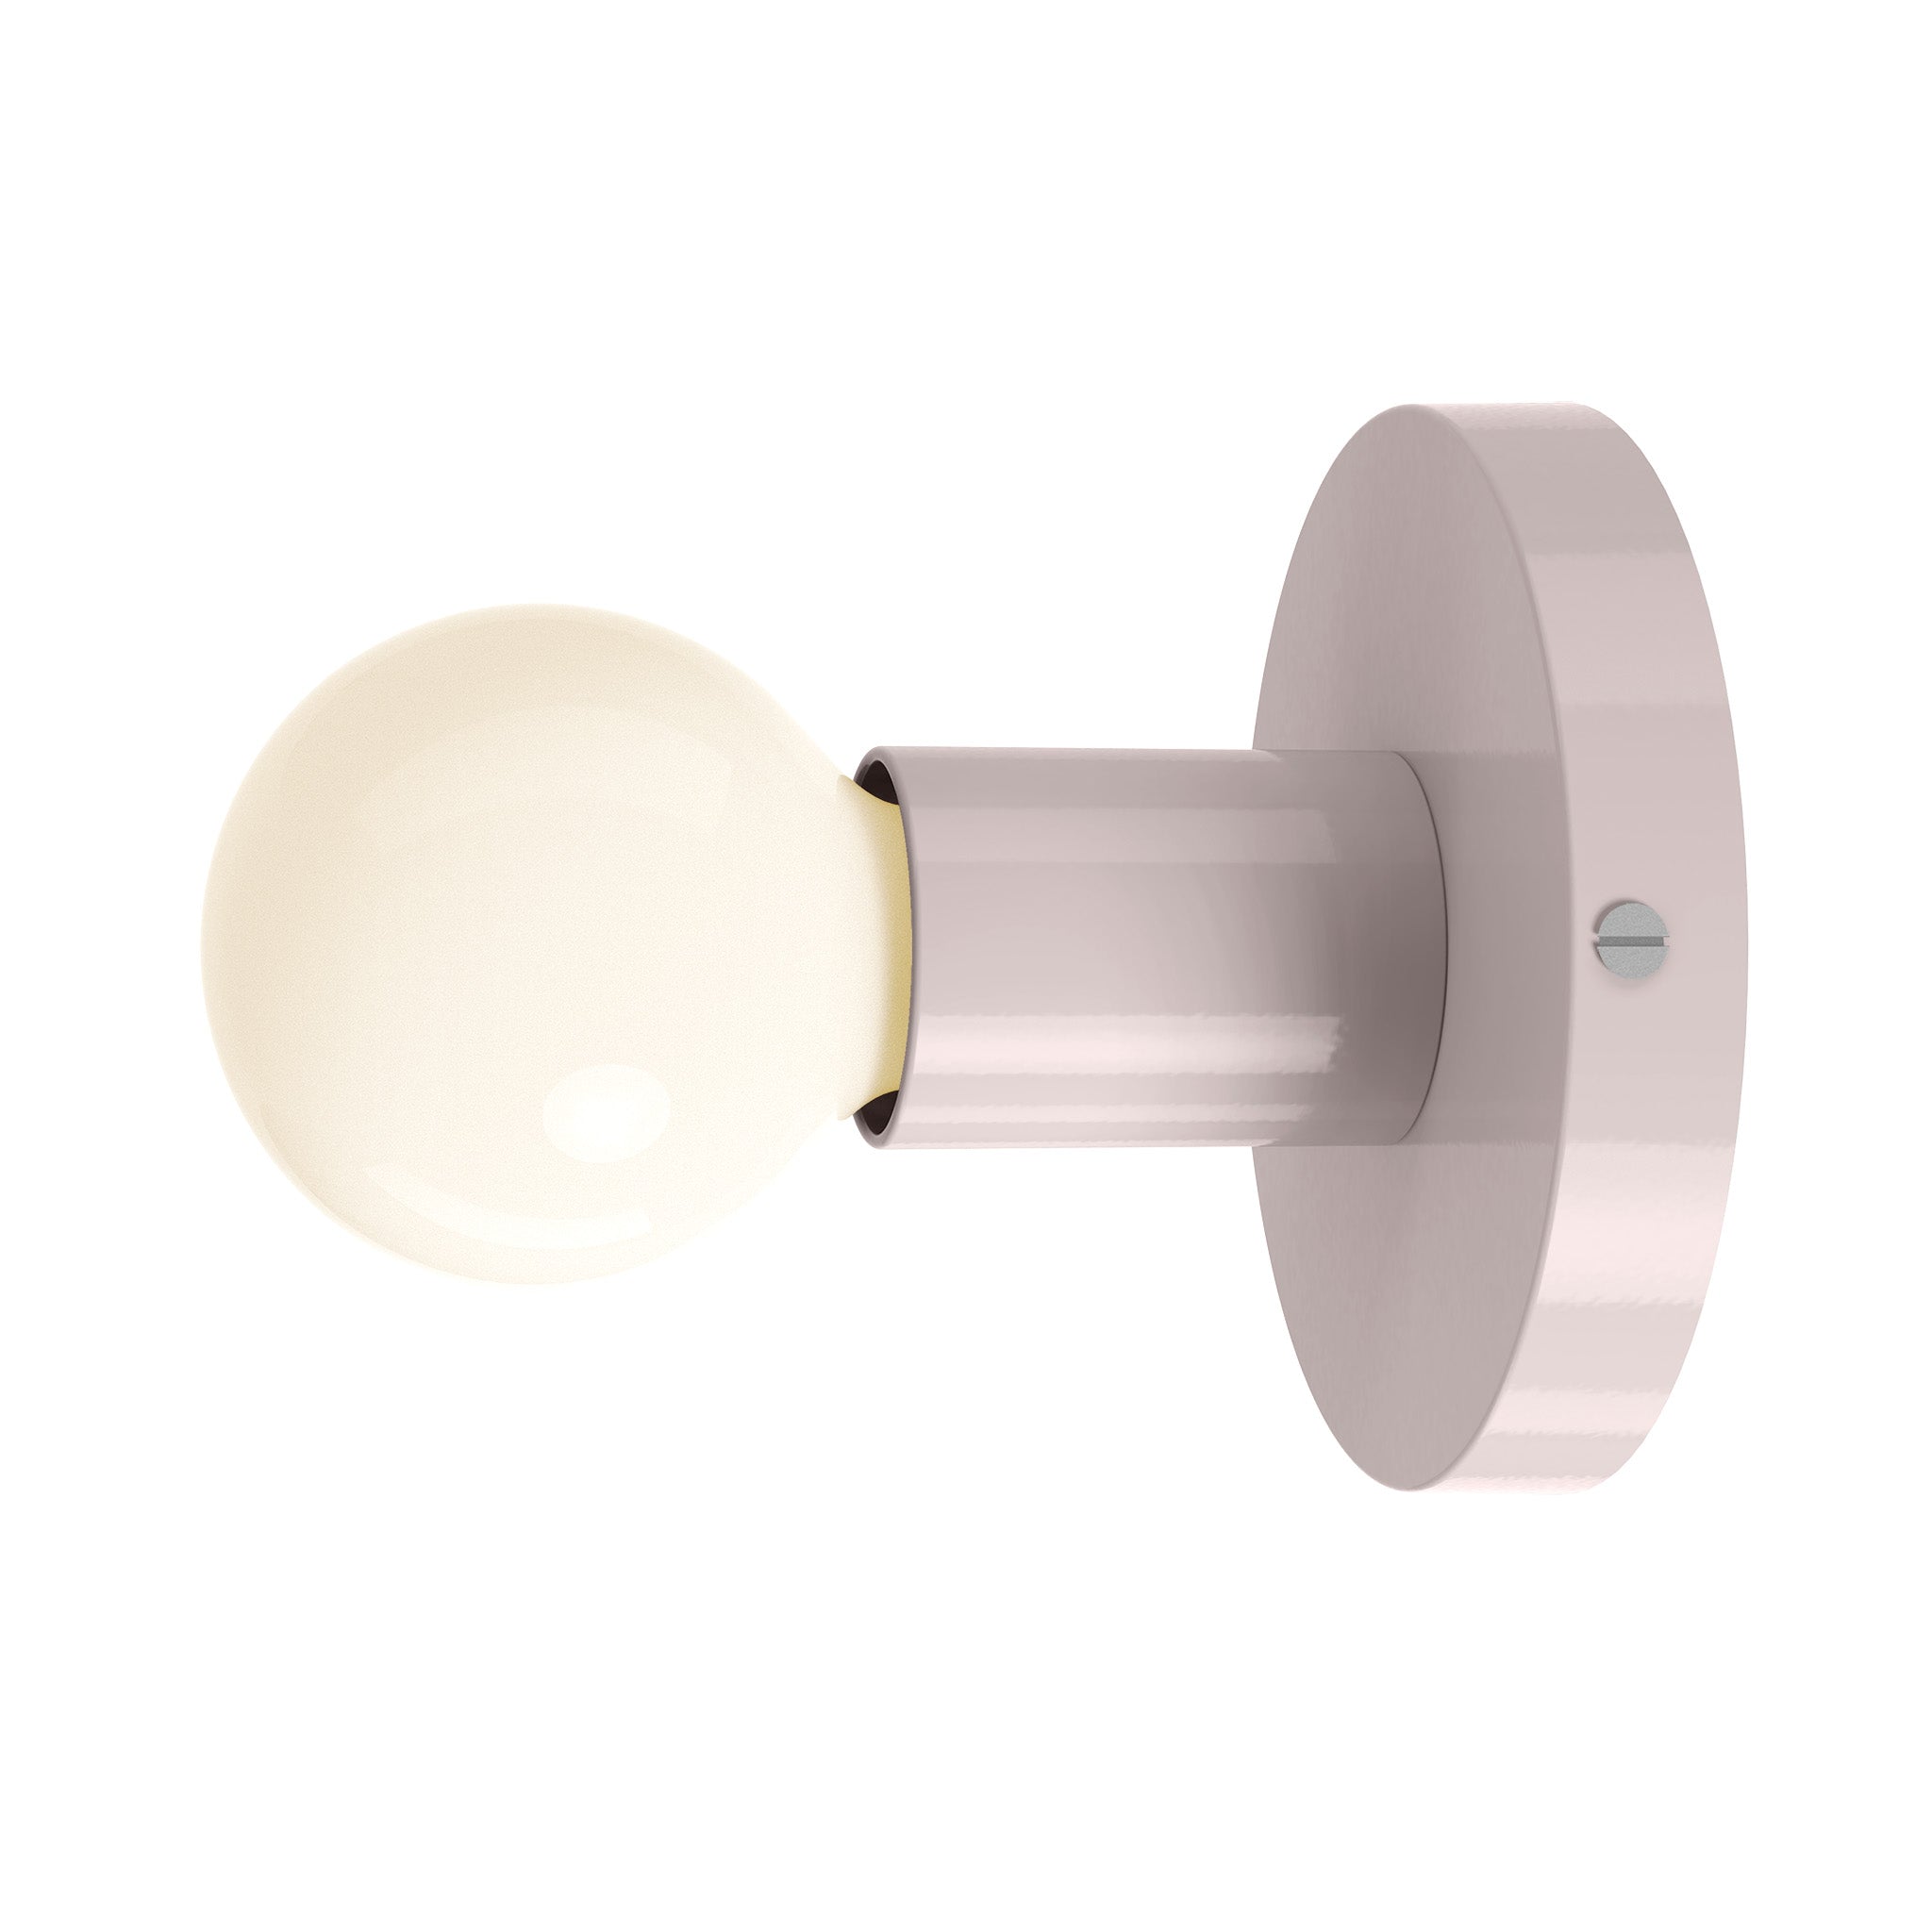 nickel barely color twink sconce dutton brown lighting